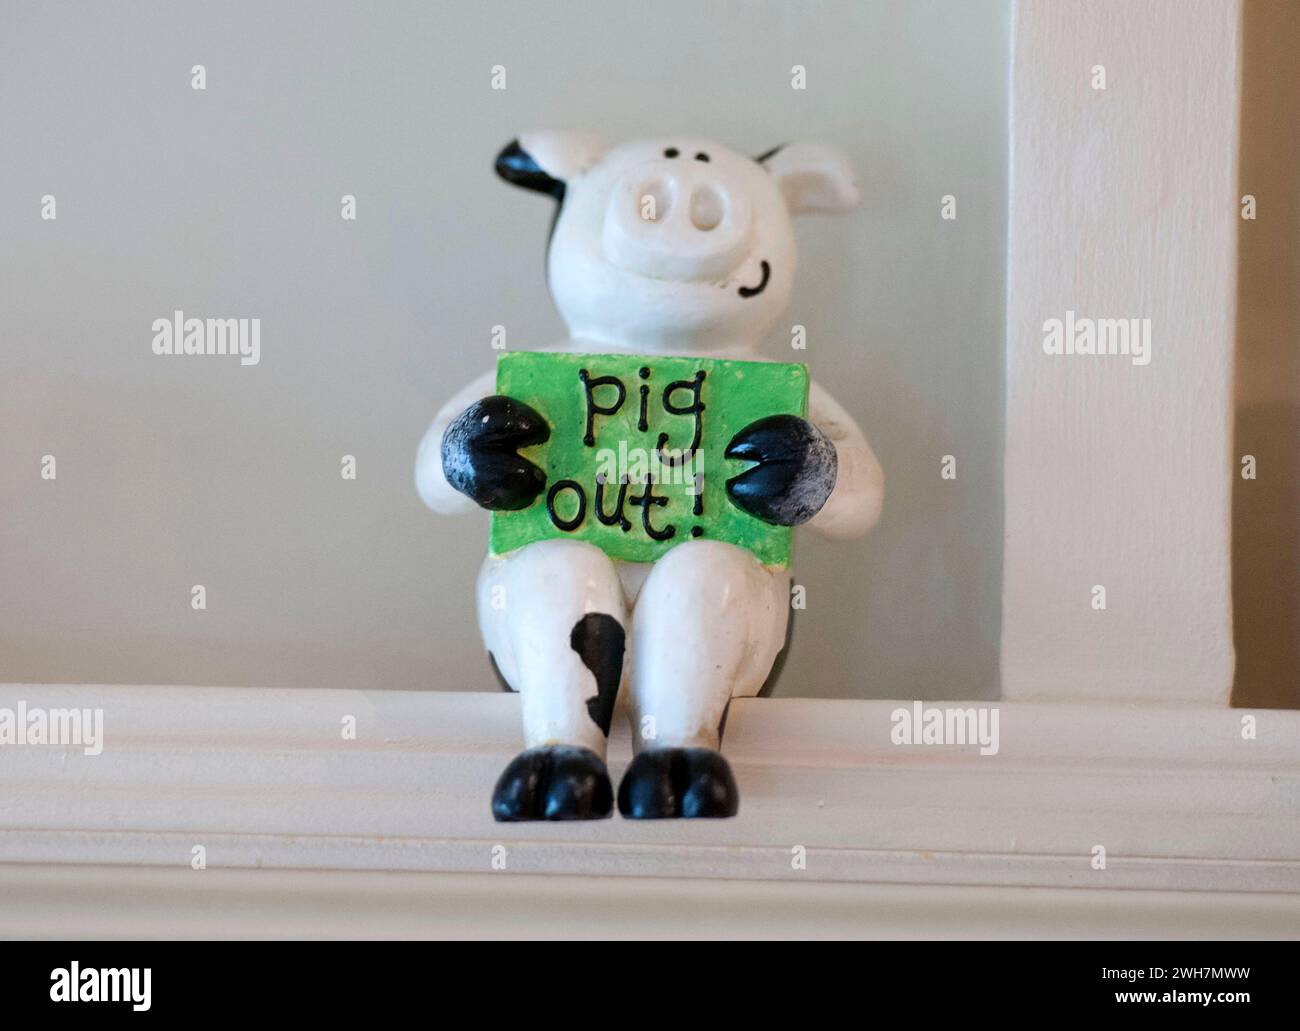 Pig-out-Ornament Stockfoto